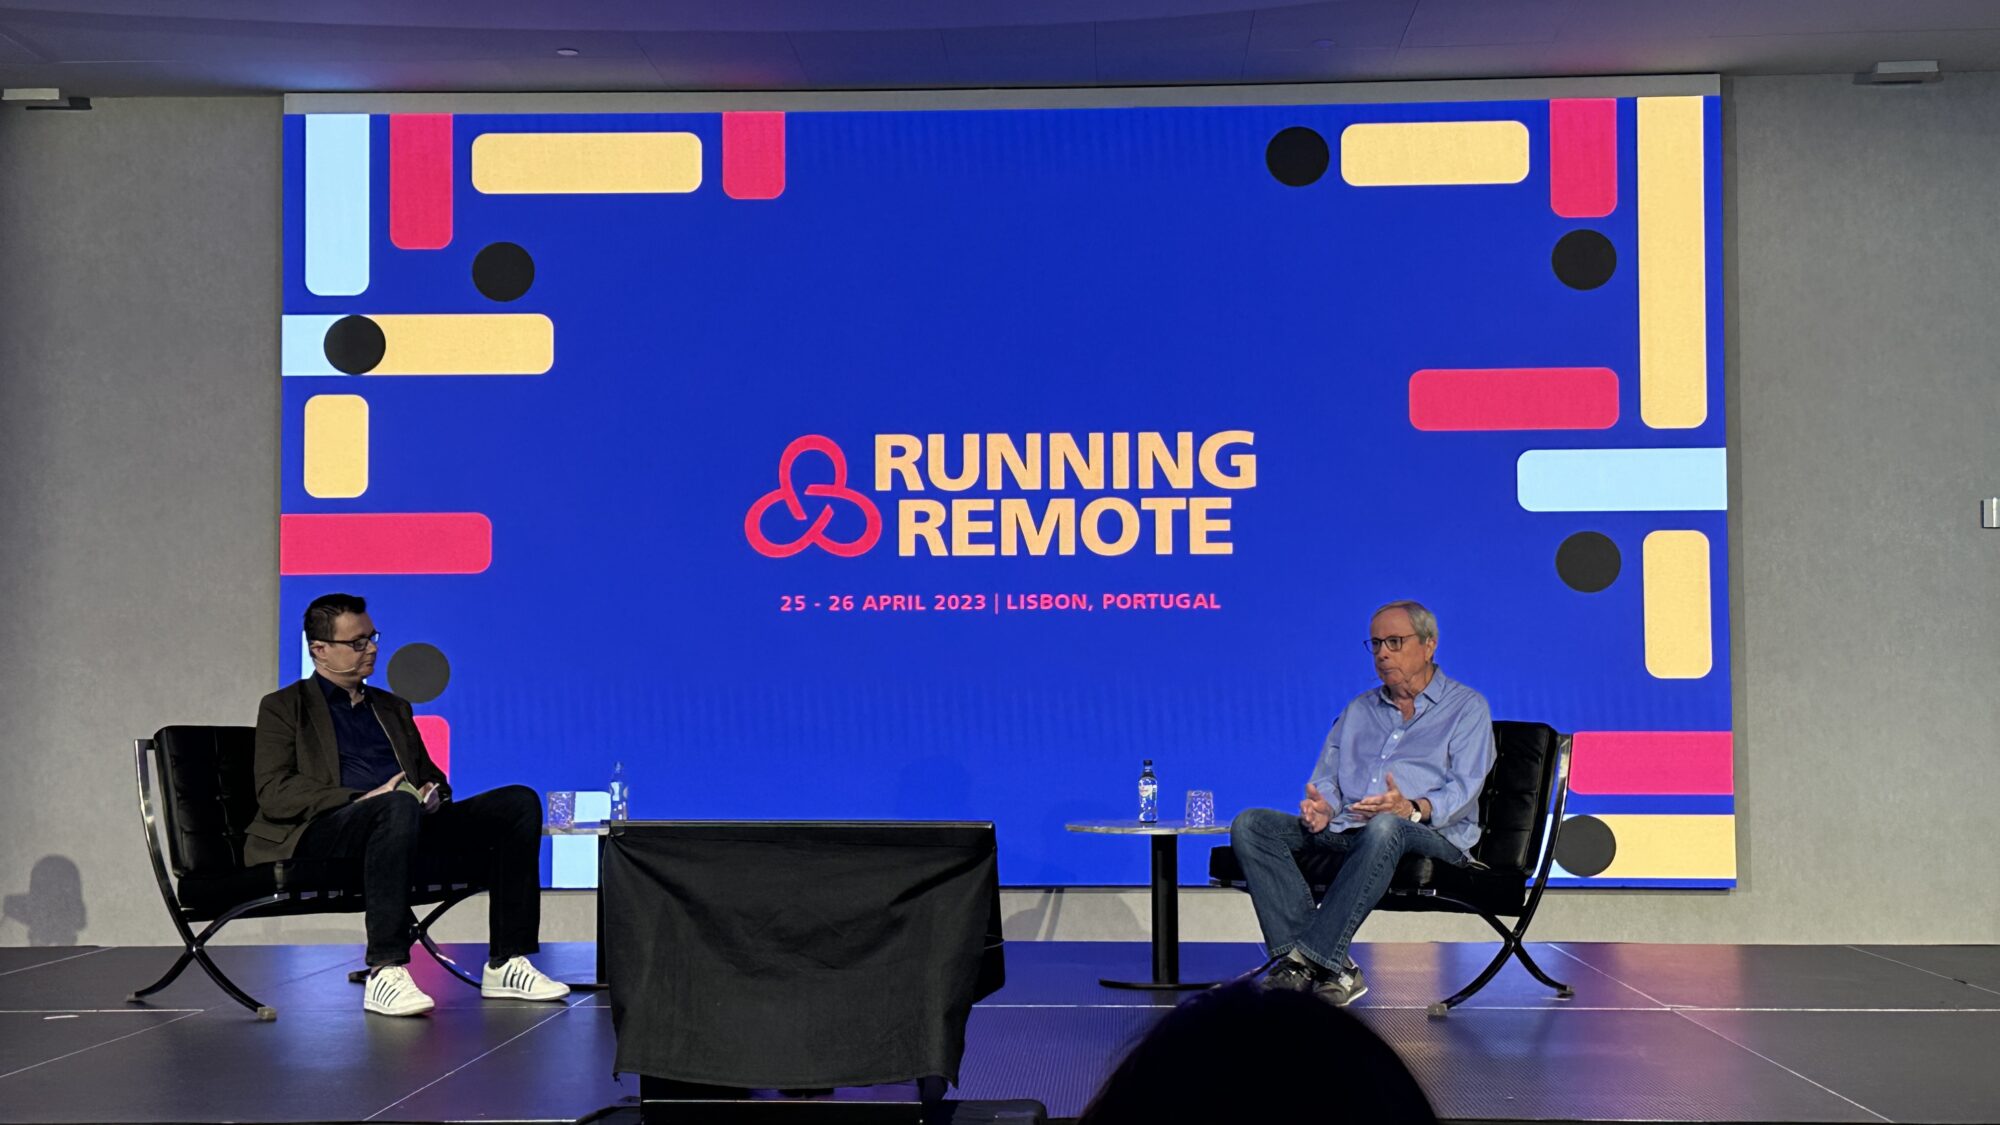 At the Running Remote Conference in Lisbon